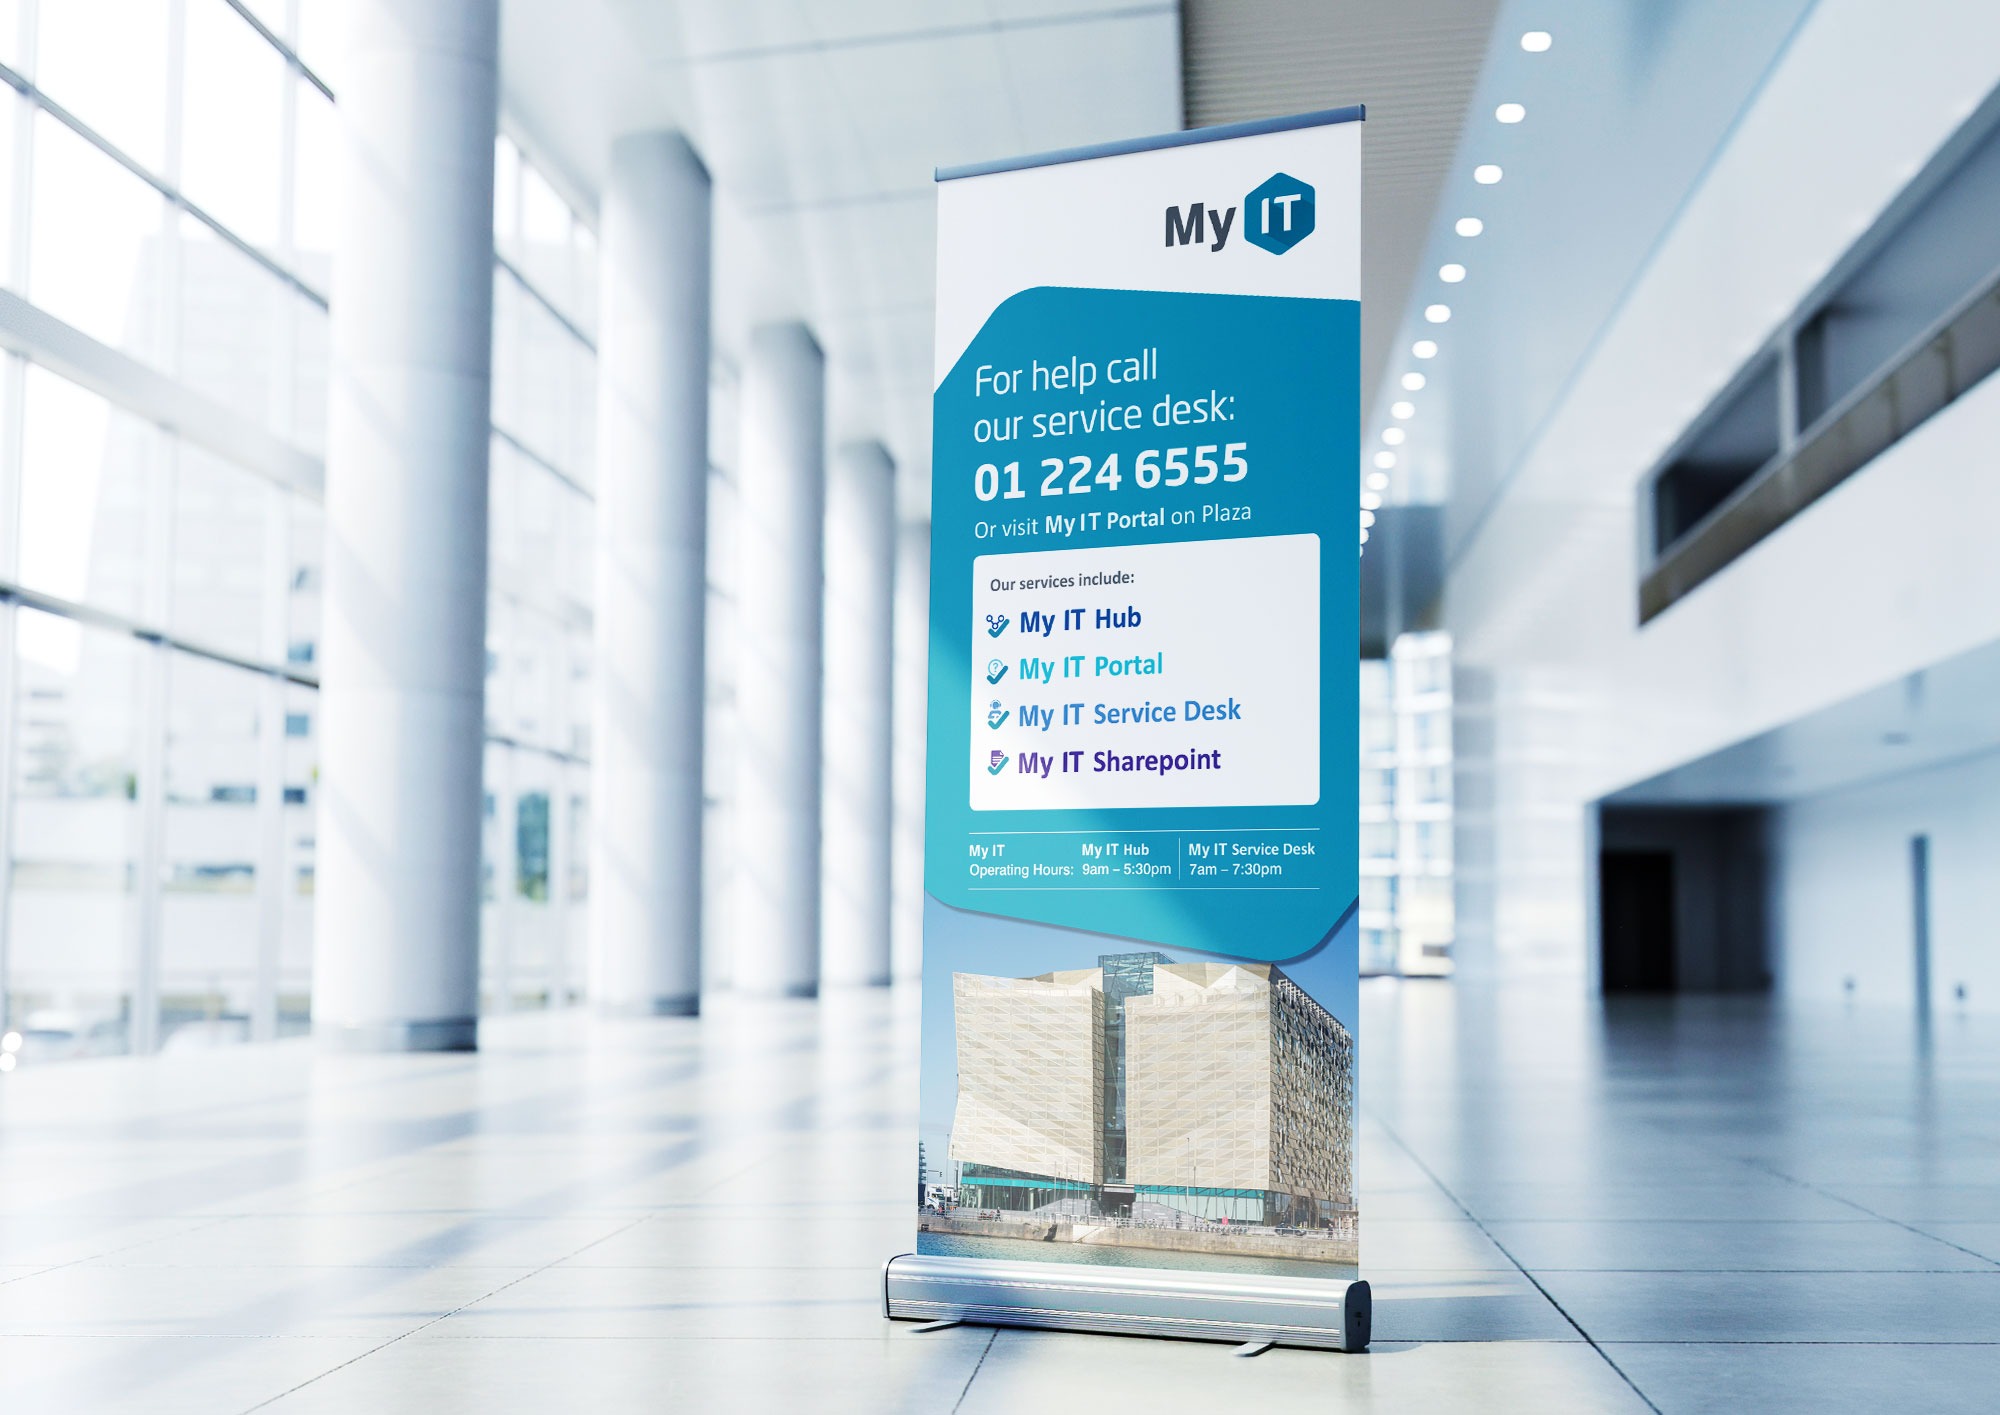 Pull up banner branding in an office lobby area